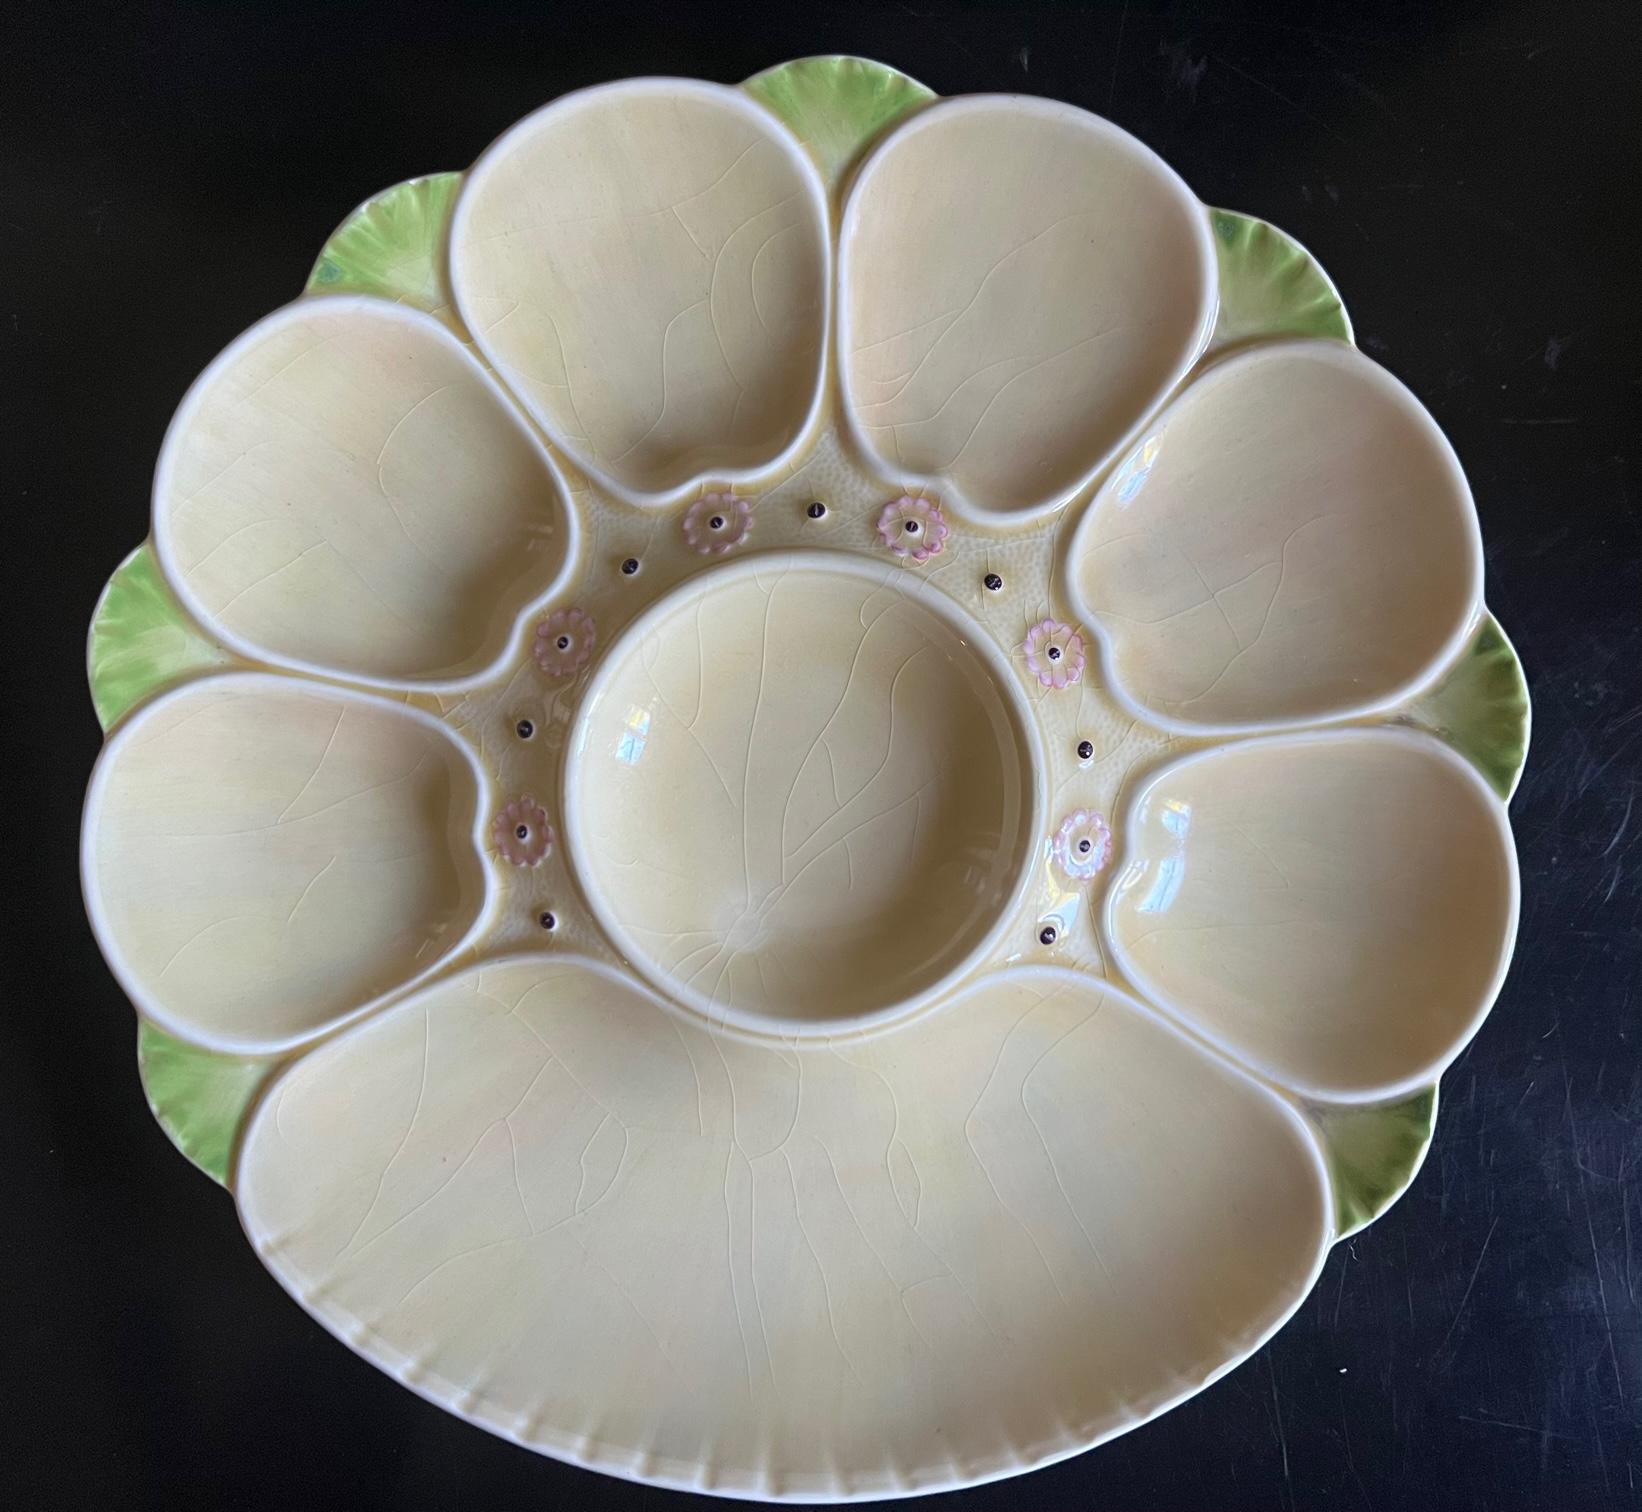 Cream colored oyster plate with a multi colored luster glaze, pink flowers and green tips was made in England by Minton around 1900. The plate has six oyster wells, a center lemon or sauce well and a larger well for lemons or crackers.

This back